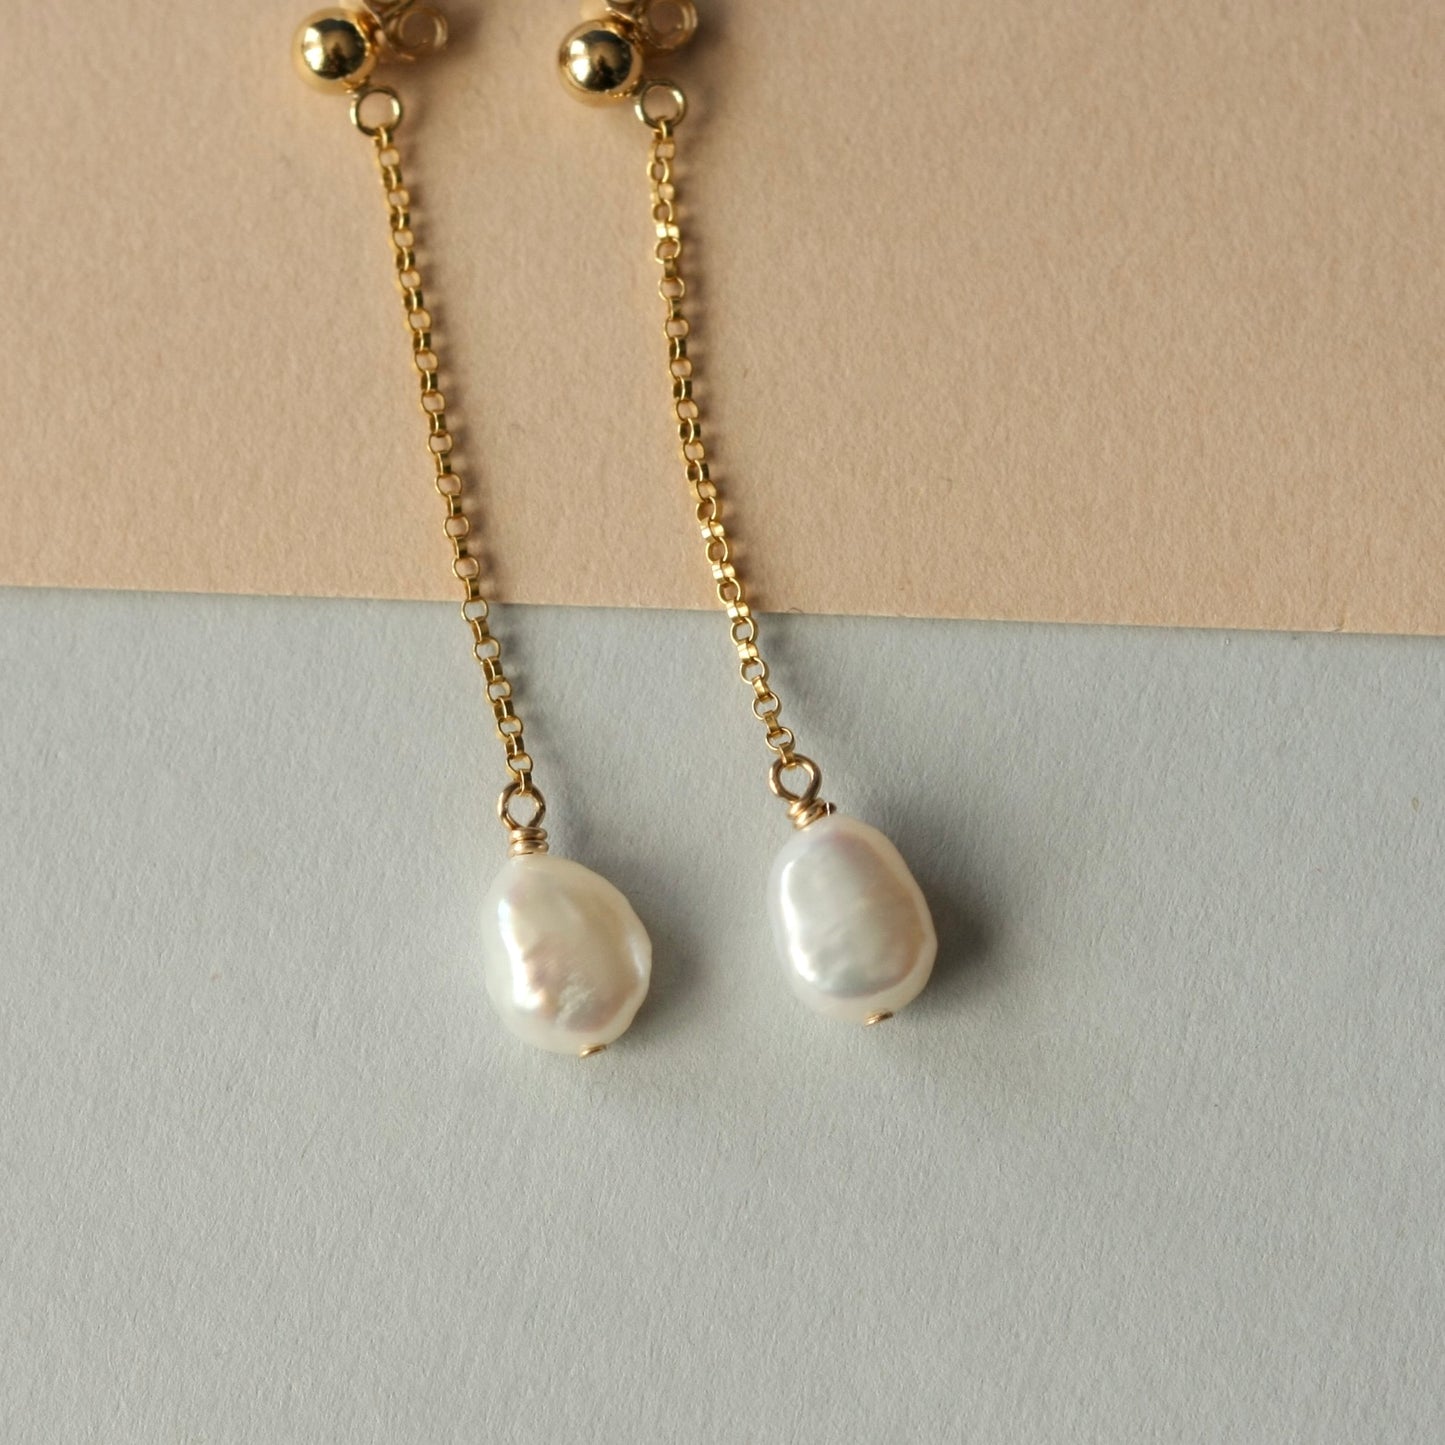 Baroque Pearl and Gold Chain Earrings